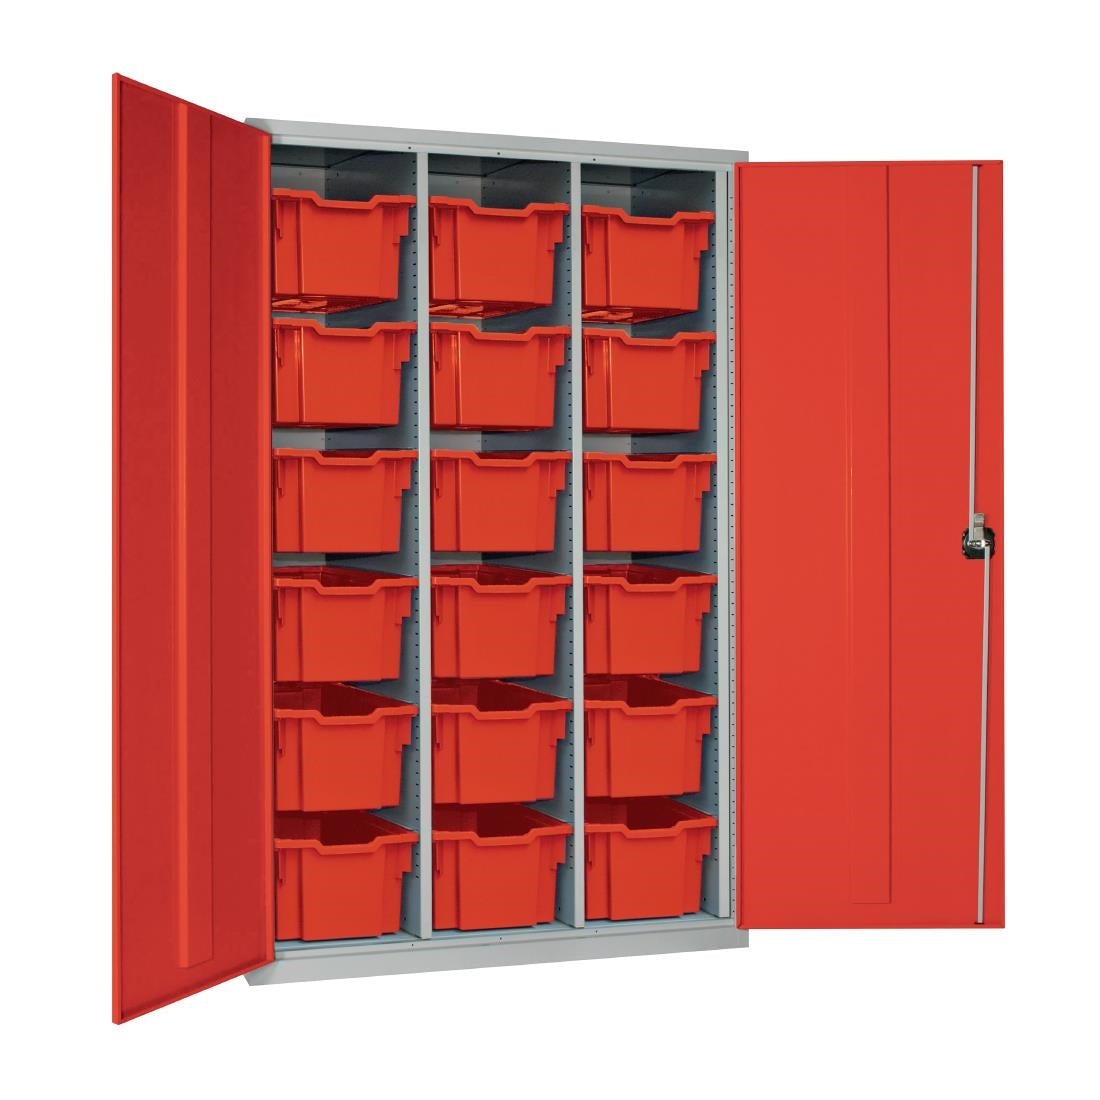 18 Tray High-Capacity Storage Cupboard - Red with Red Trays